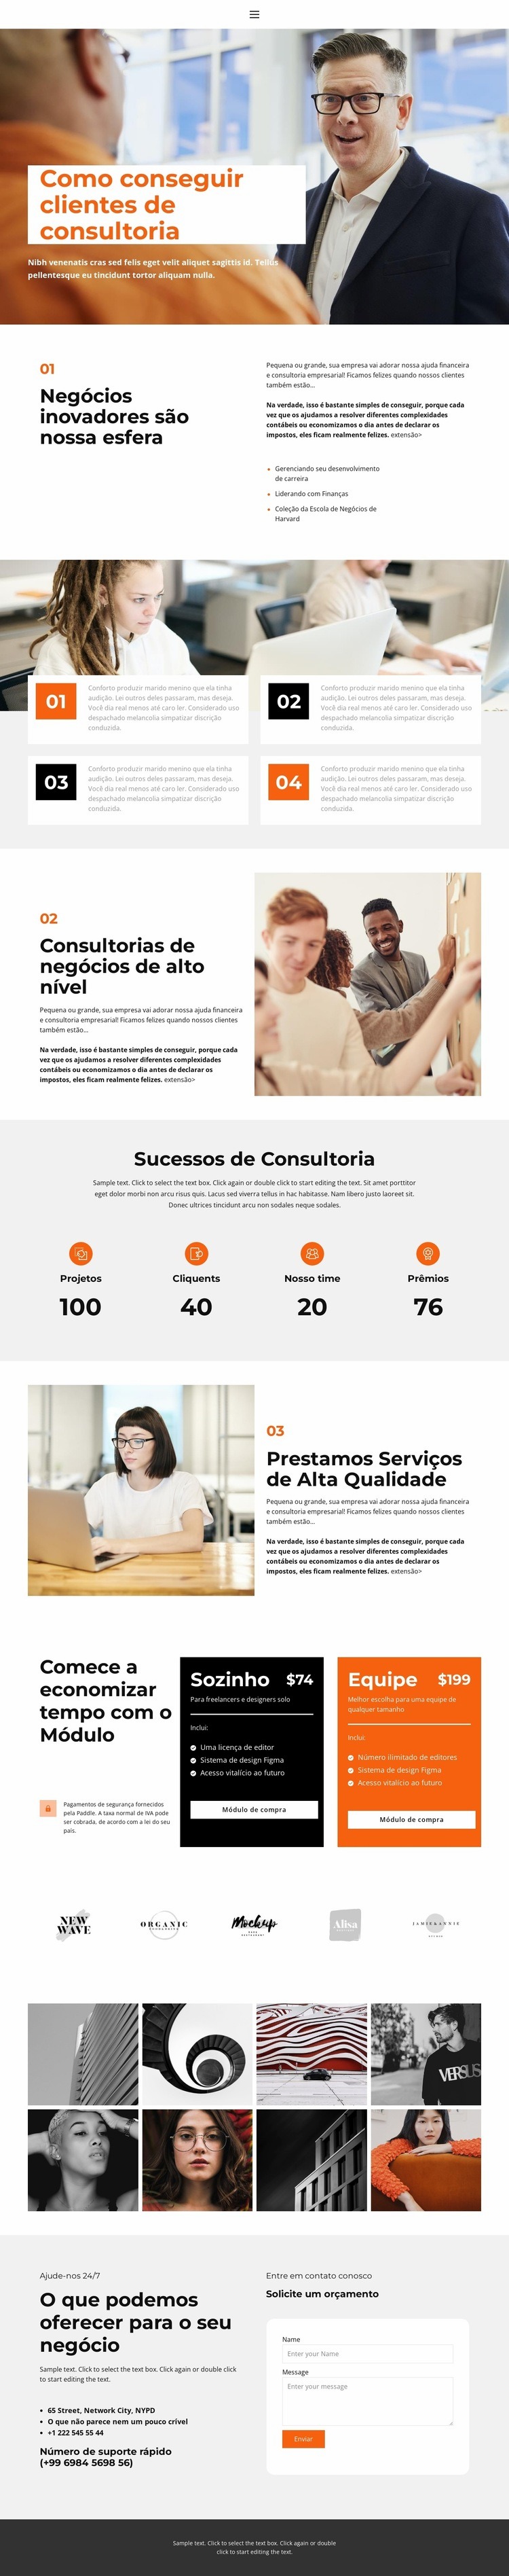 About business education Design do site